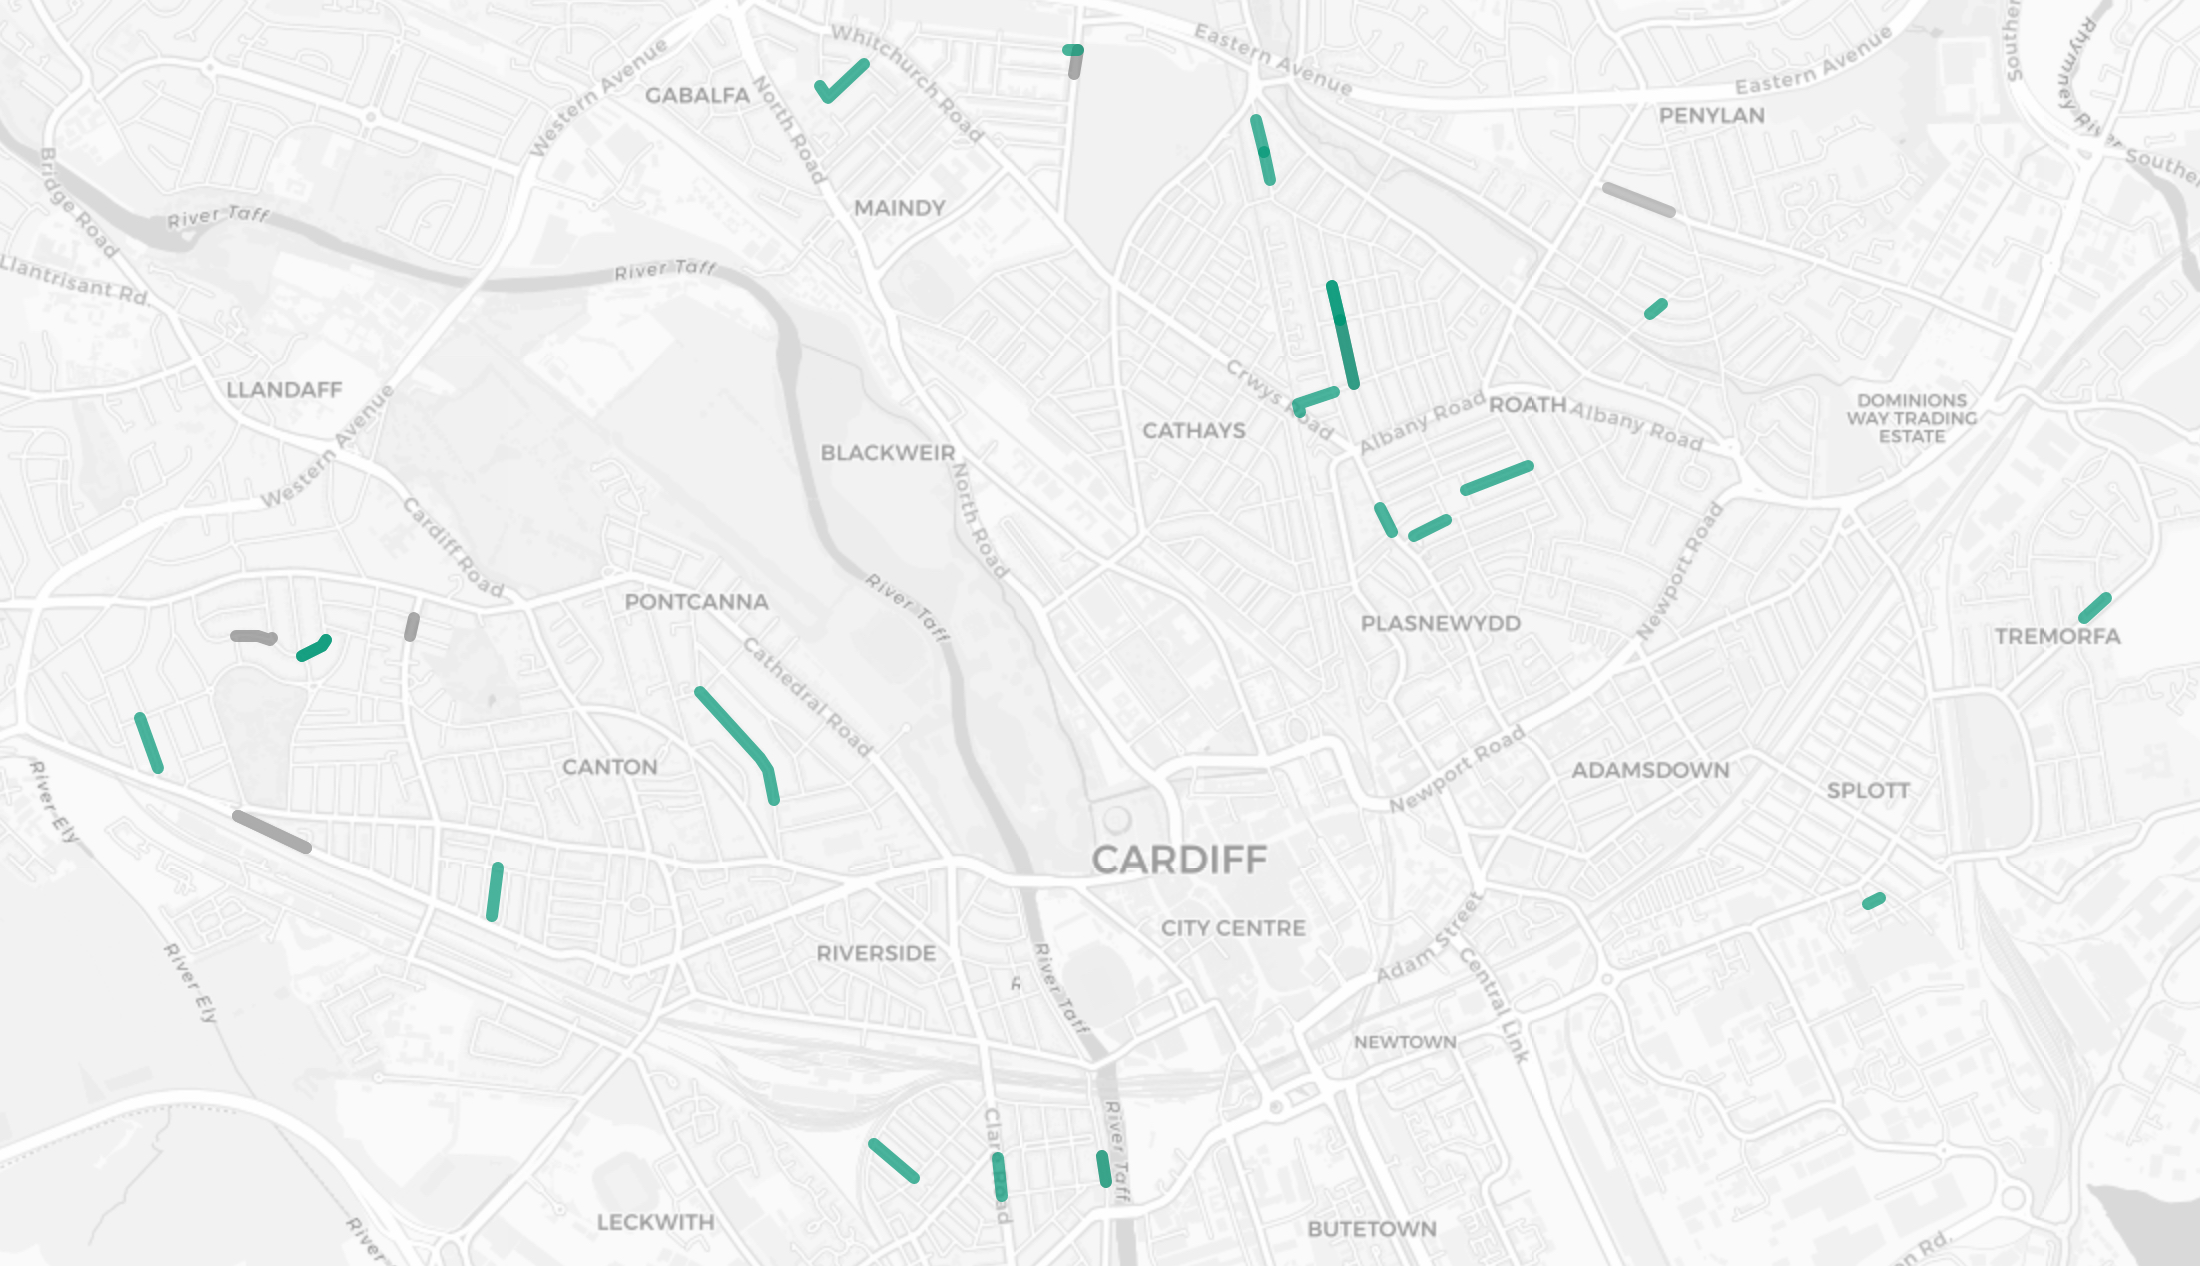 Cardiff streets where monitoring is taking place